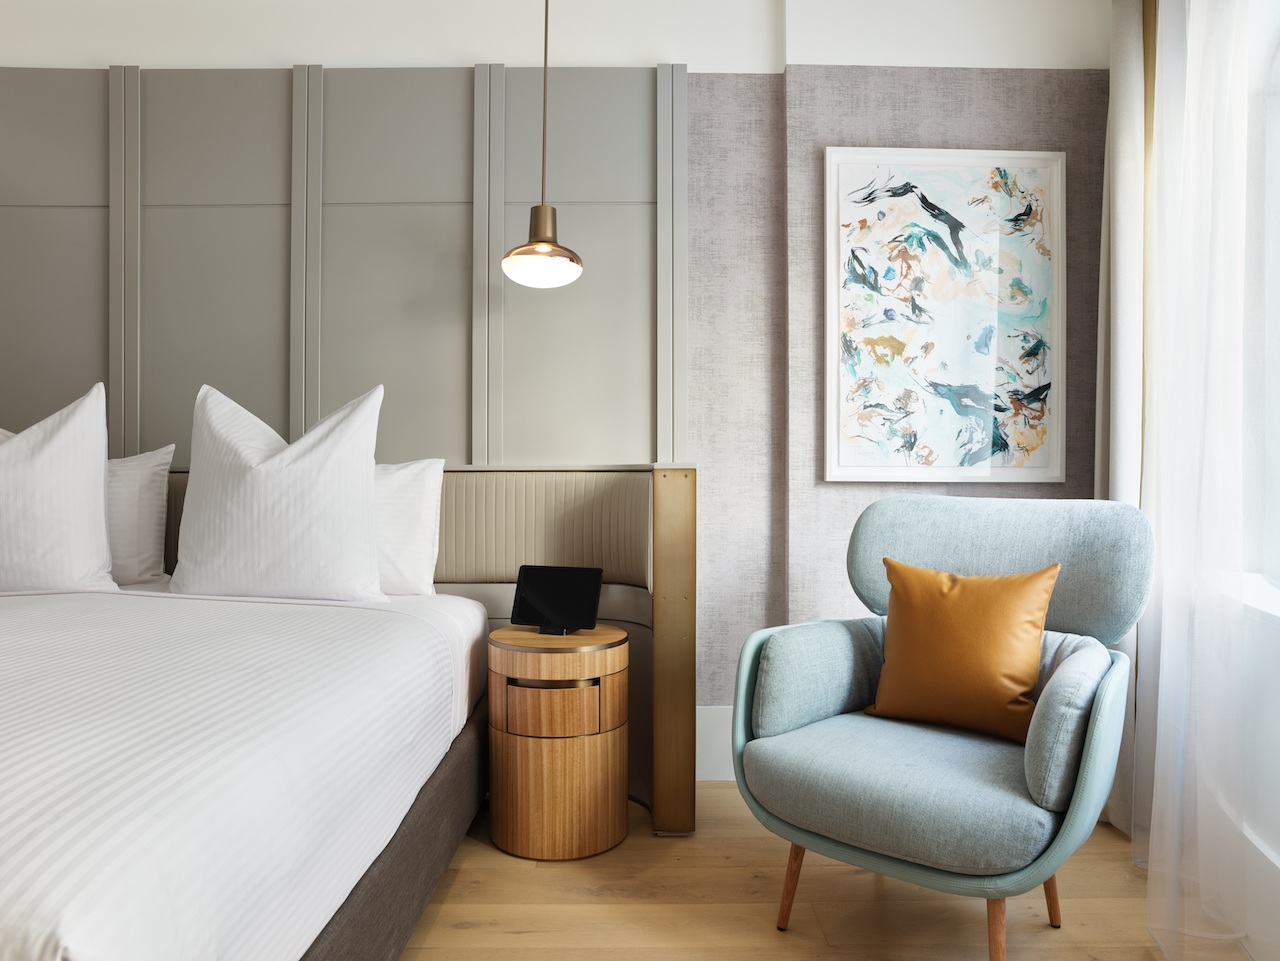 Accor marks its 400th hotel in Australia and the Pacific with the launch of  The Porter House Hotel - MGallery in Sydney.